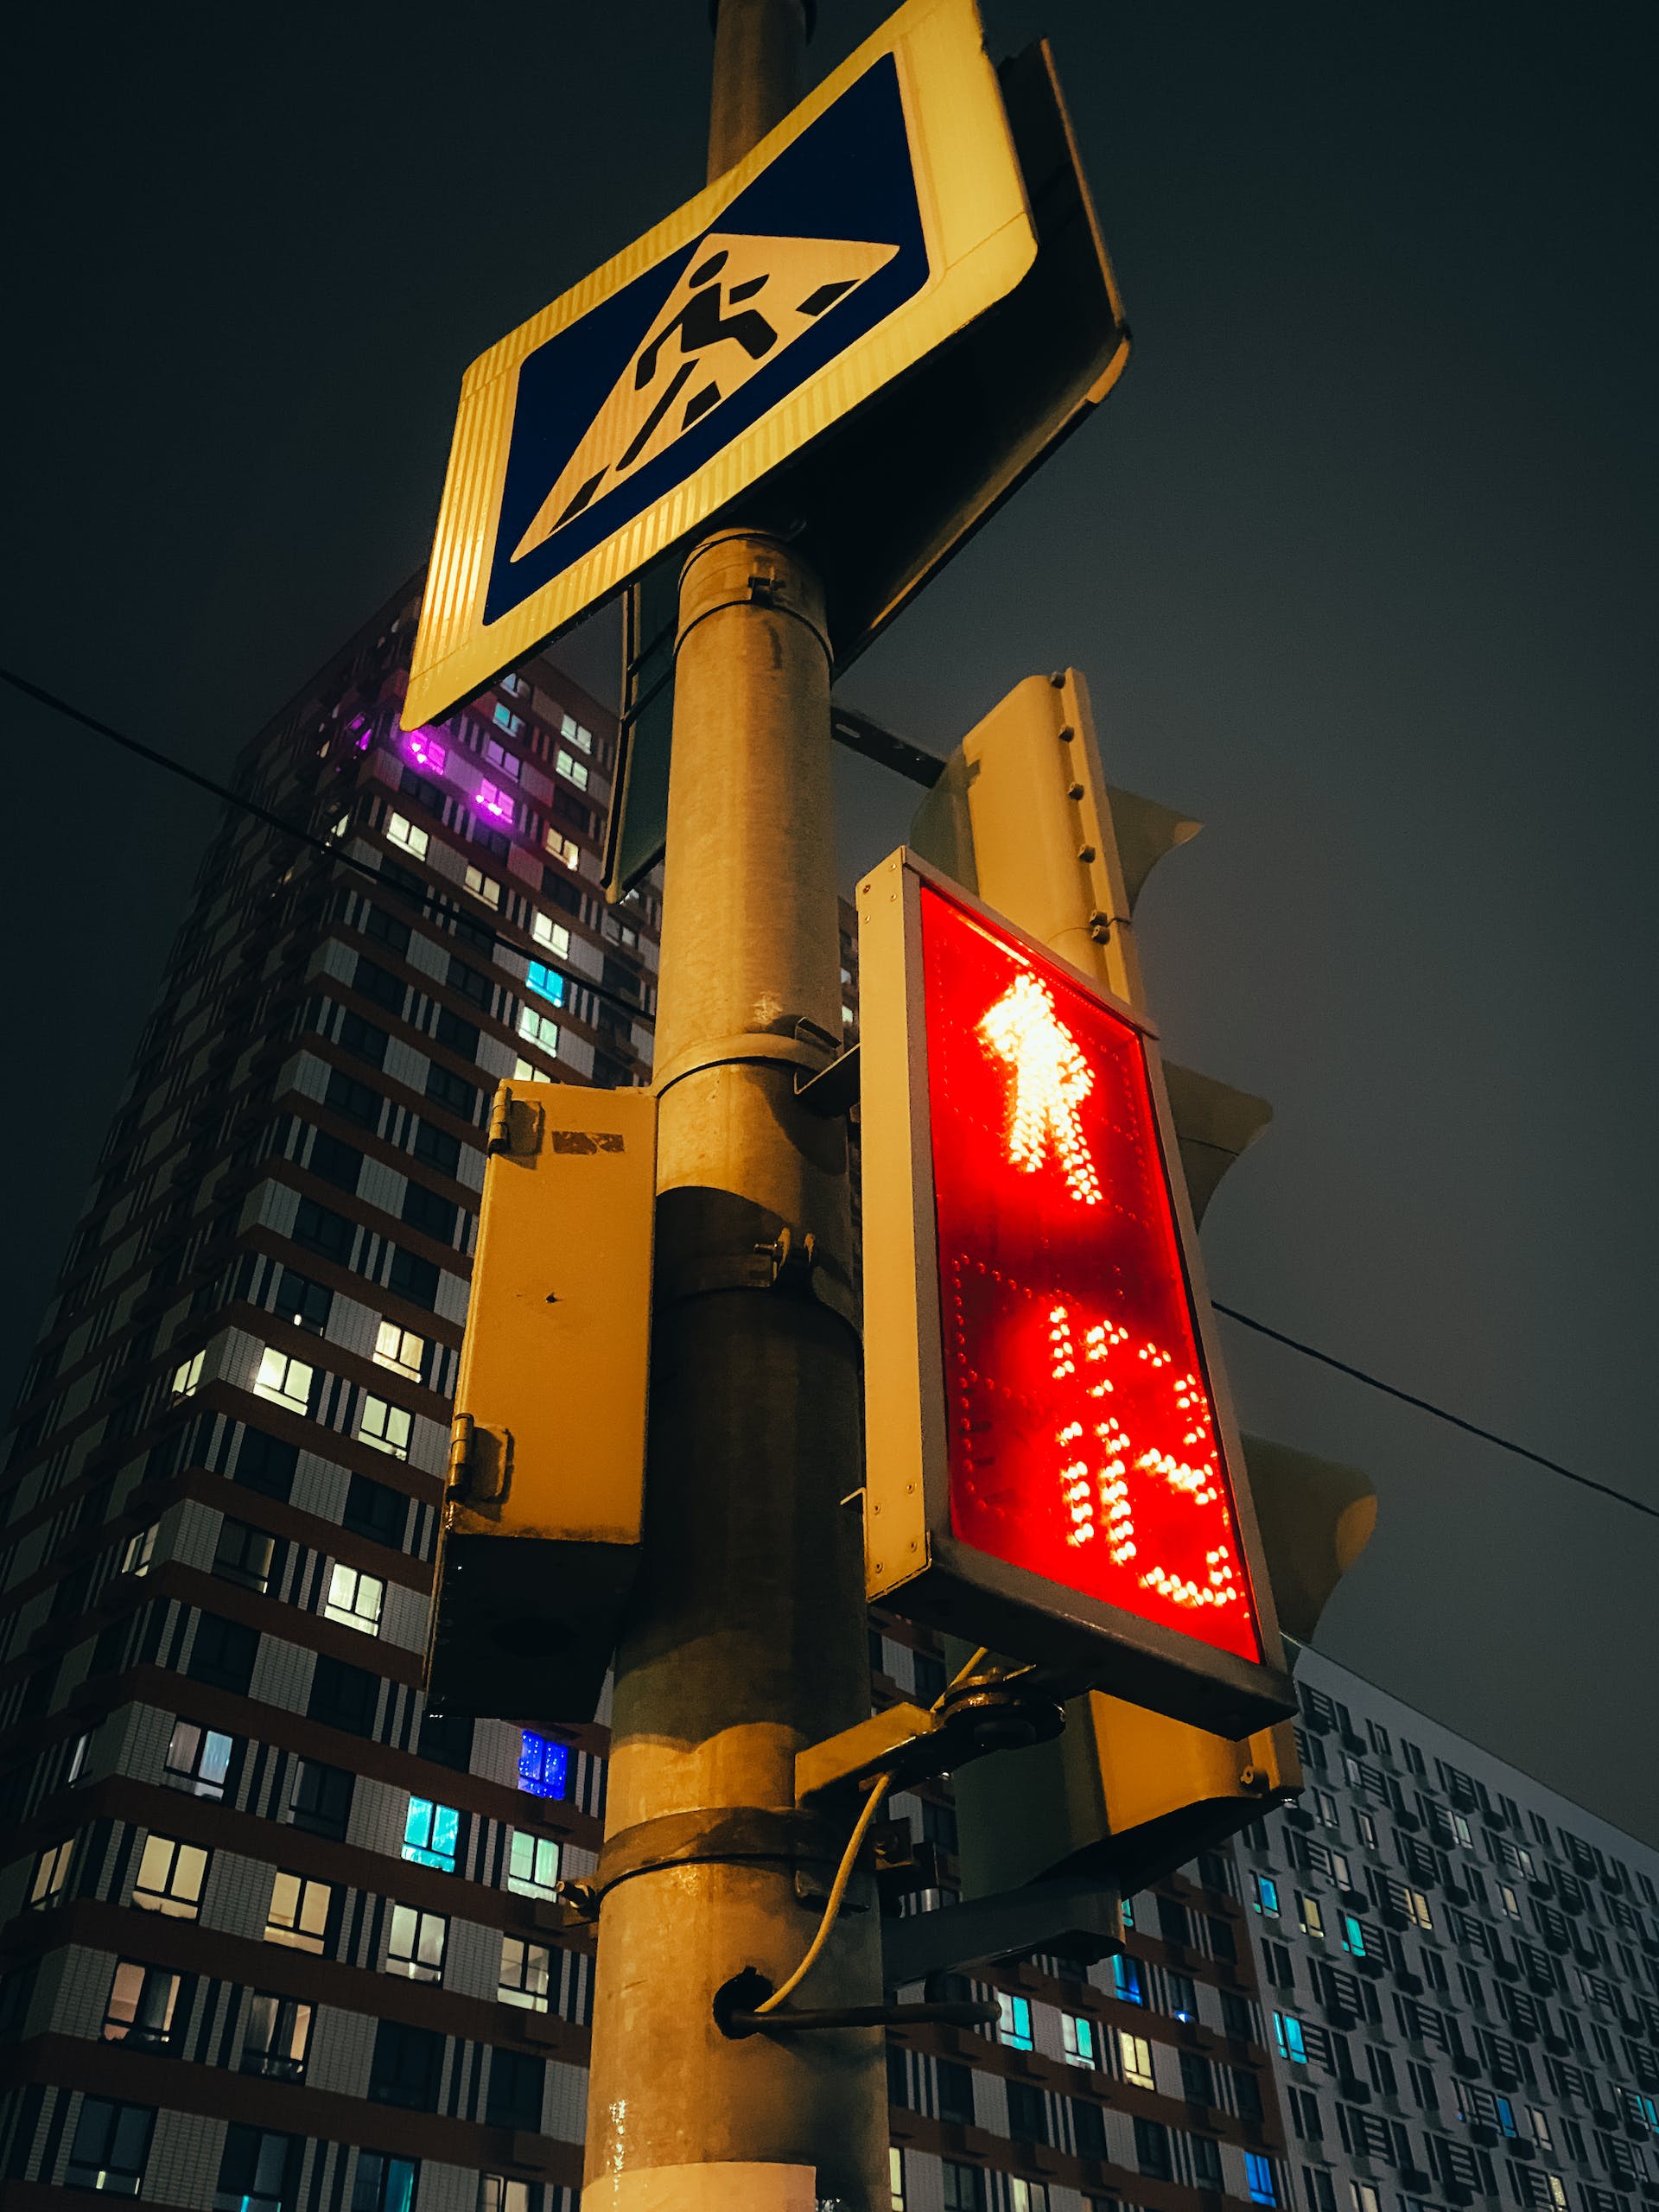 A red traffic light | Source: Pexels